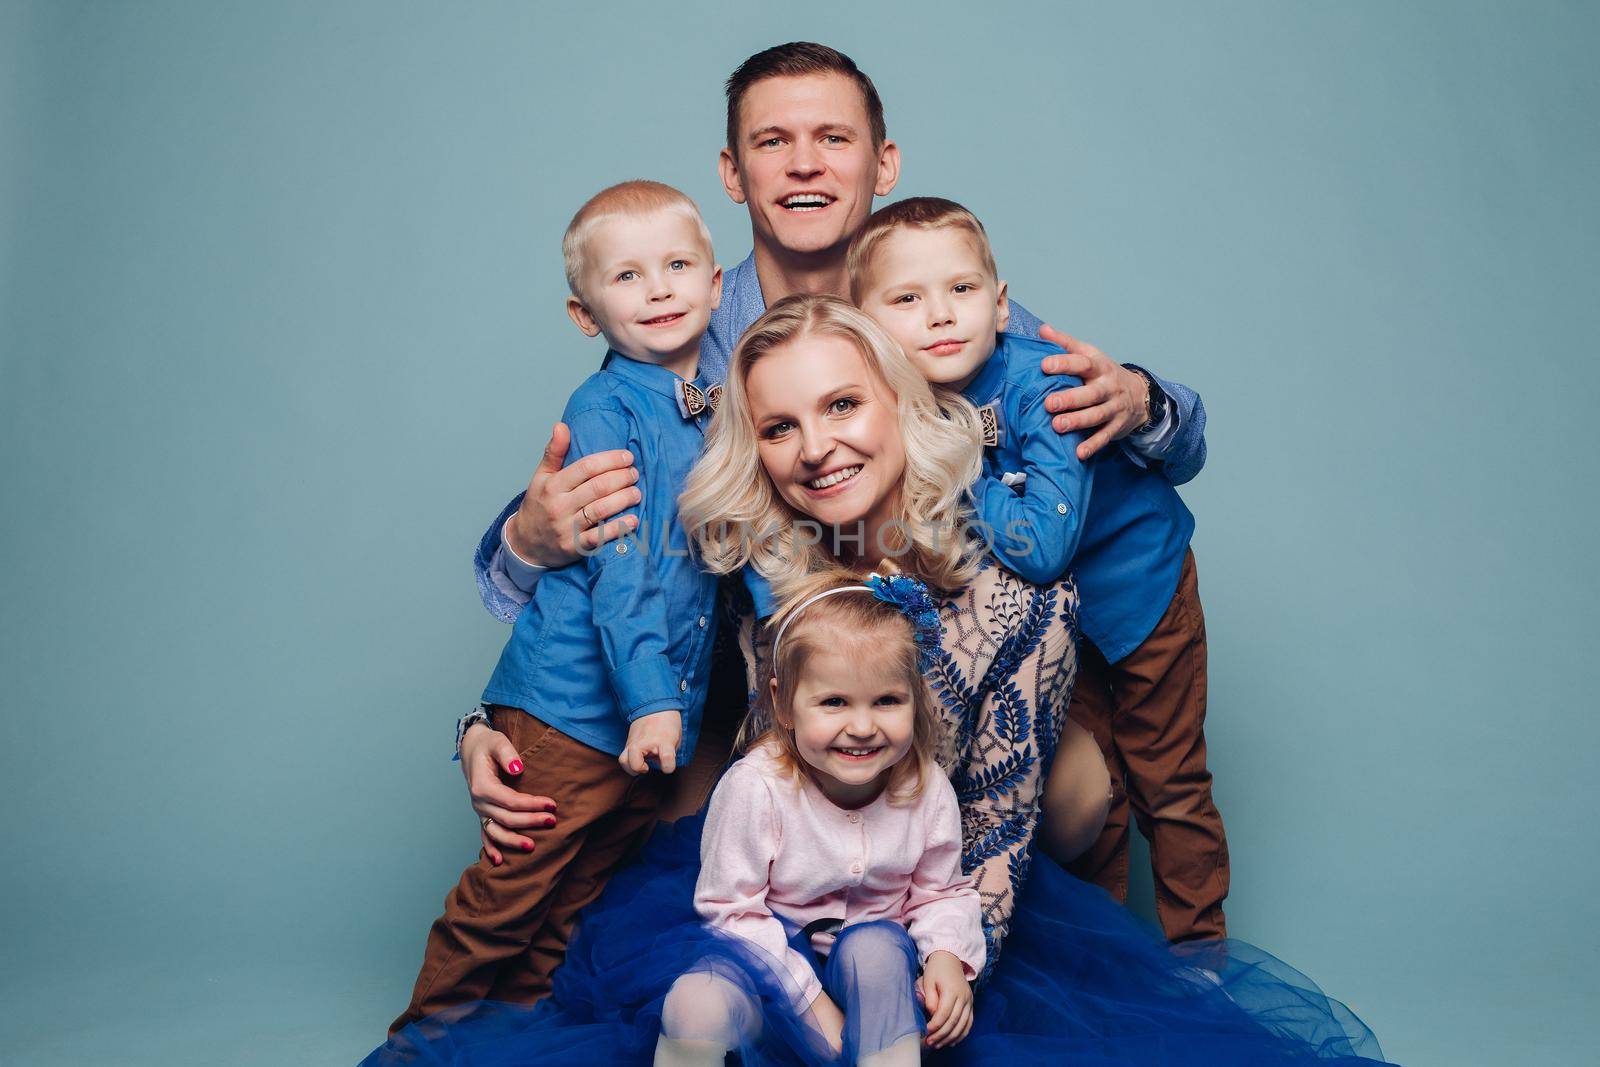 Studio portrait of happy smiling family of five posing and looking at camera together. Cheerful father embracing his children. Isolate on blue.